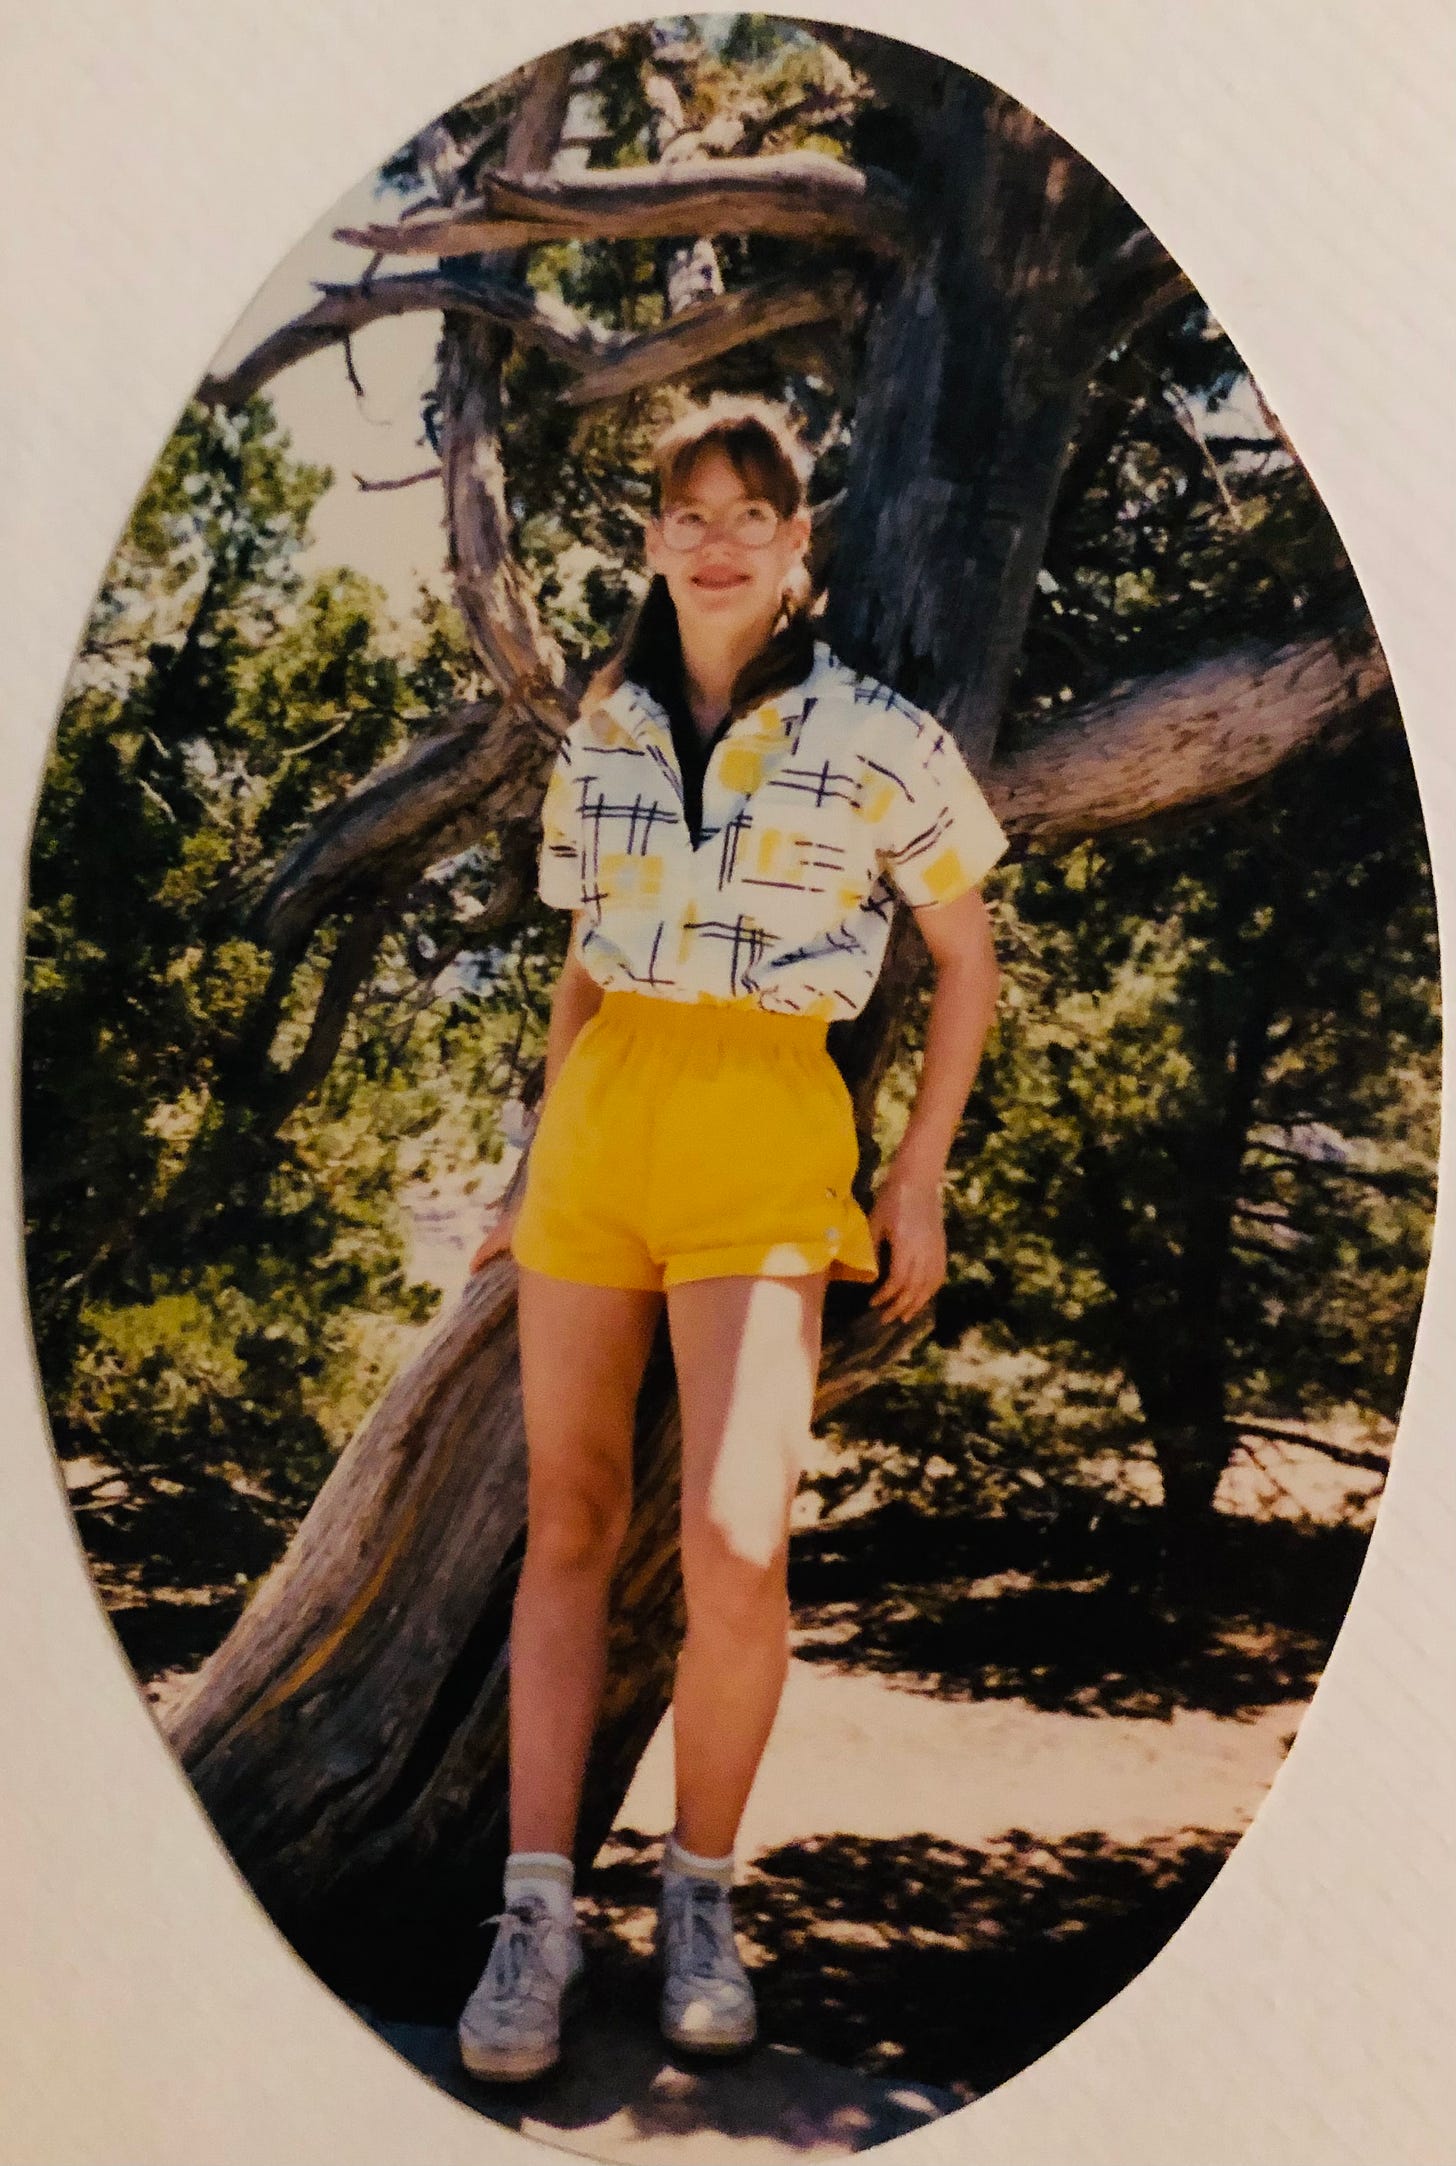 The author at 13 in big glasses, braces, canary yellow shorts, grungy sneakers, and two shirts--black under a white-black-and-yellow slashy 80s geometrical design. Both collars flipped up. Of course.